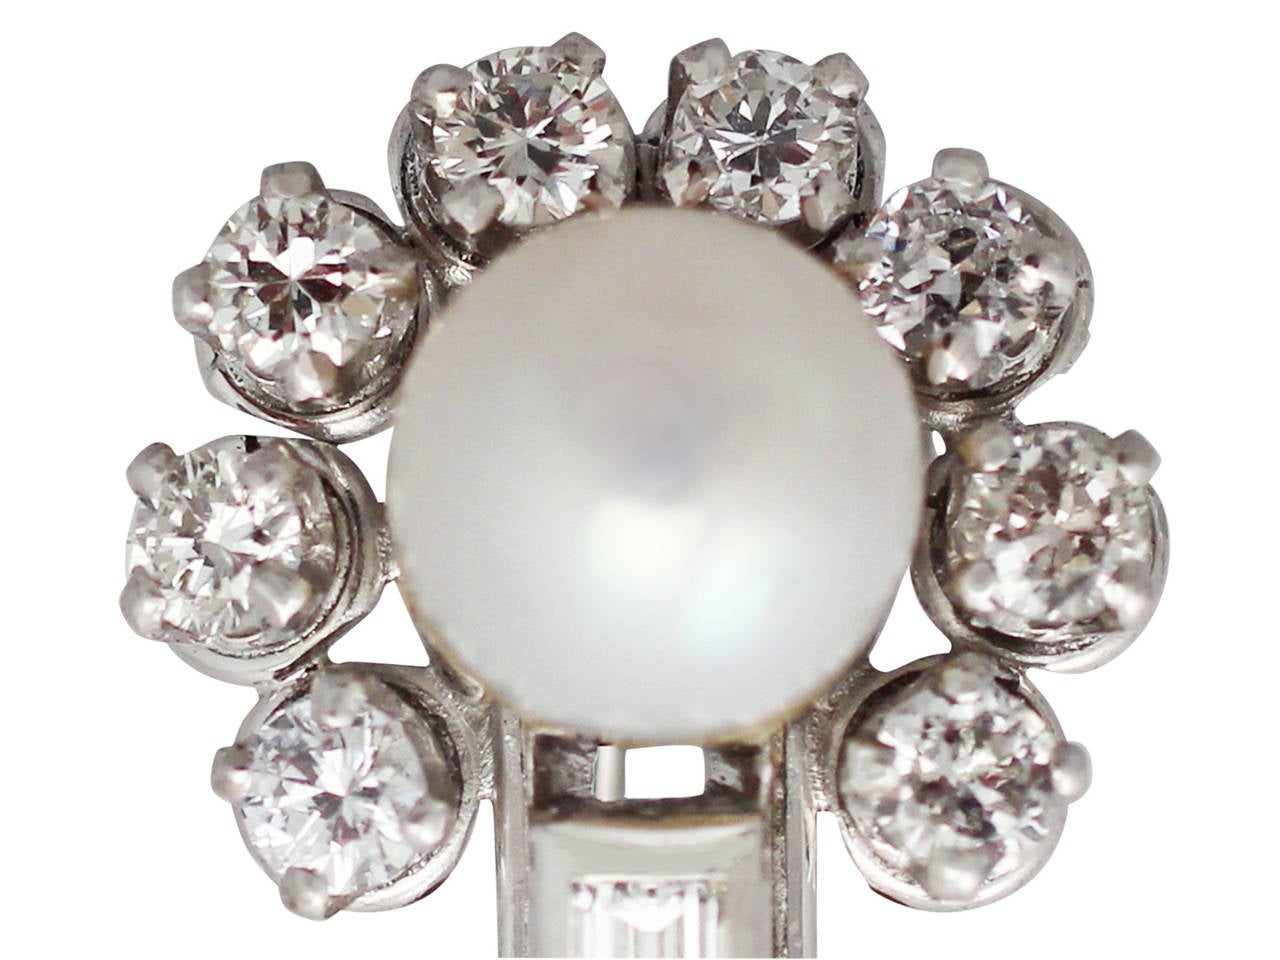 A fine and impressive pair of vintage 1.04 carat diamond and pearl, 18 carat white gold earrings; an addition to our vintage jewelry collections.

These impressive vintage pearl earrings have been crafted in 18k white gold.

Each earring displays a